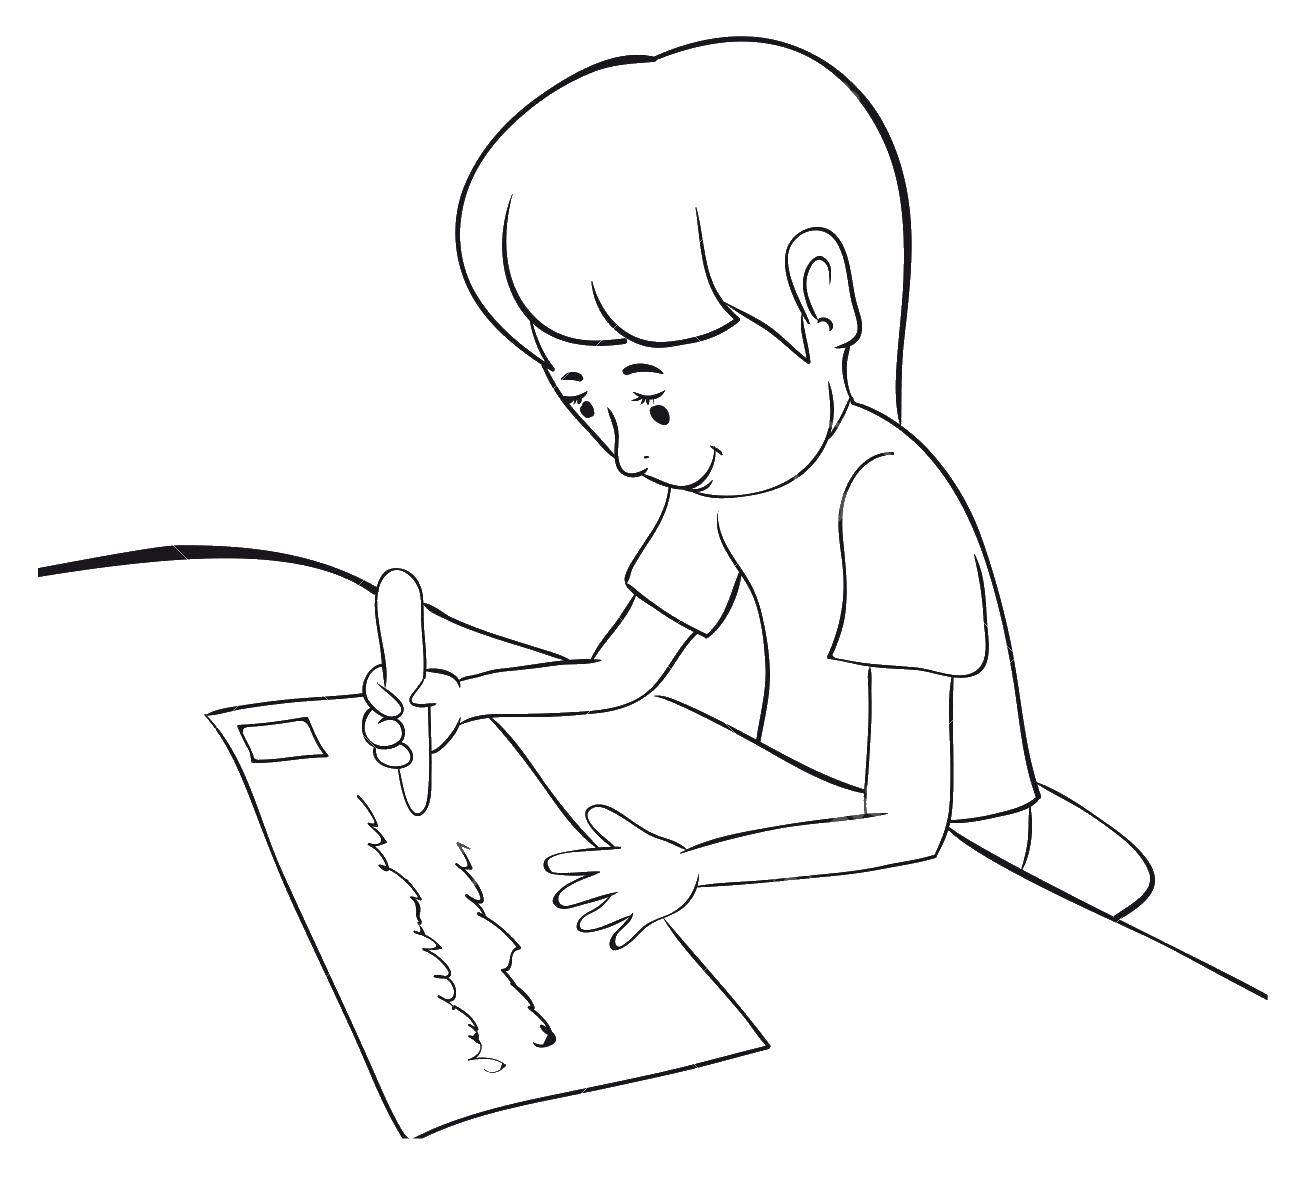 Coloring Girl and letter. Category children. Tags:  girl , letter, pen.